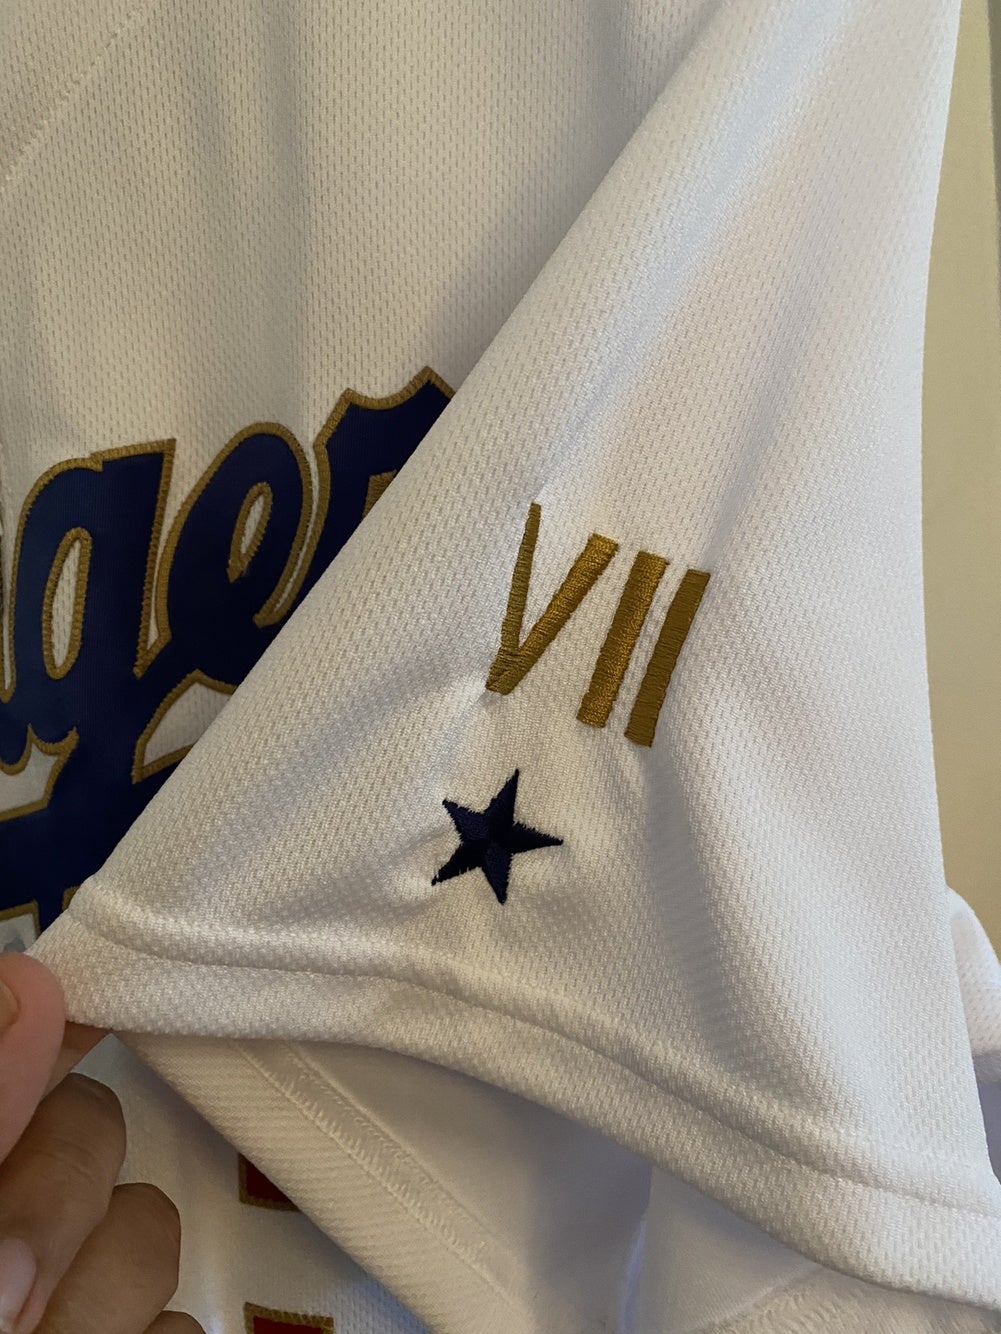 L.A. Dodgers Gold Jerseys, Dodgers Gold Collection Gear, Dodgers Gold Hats